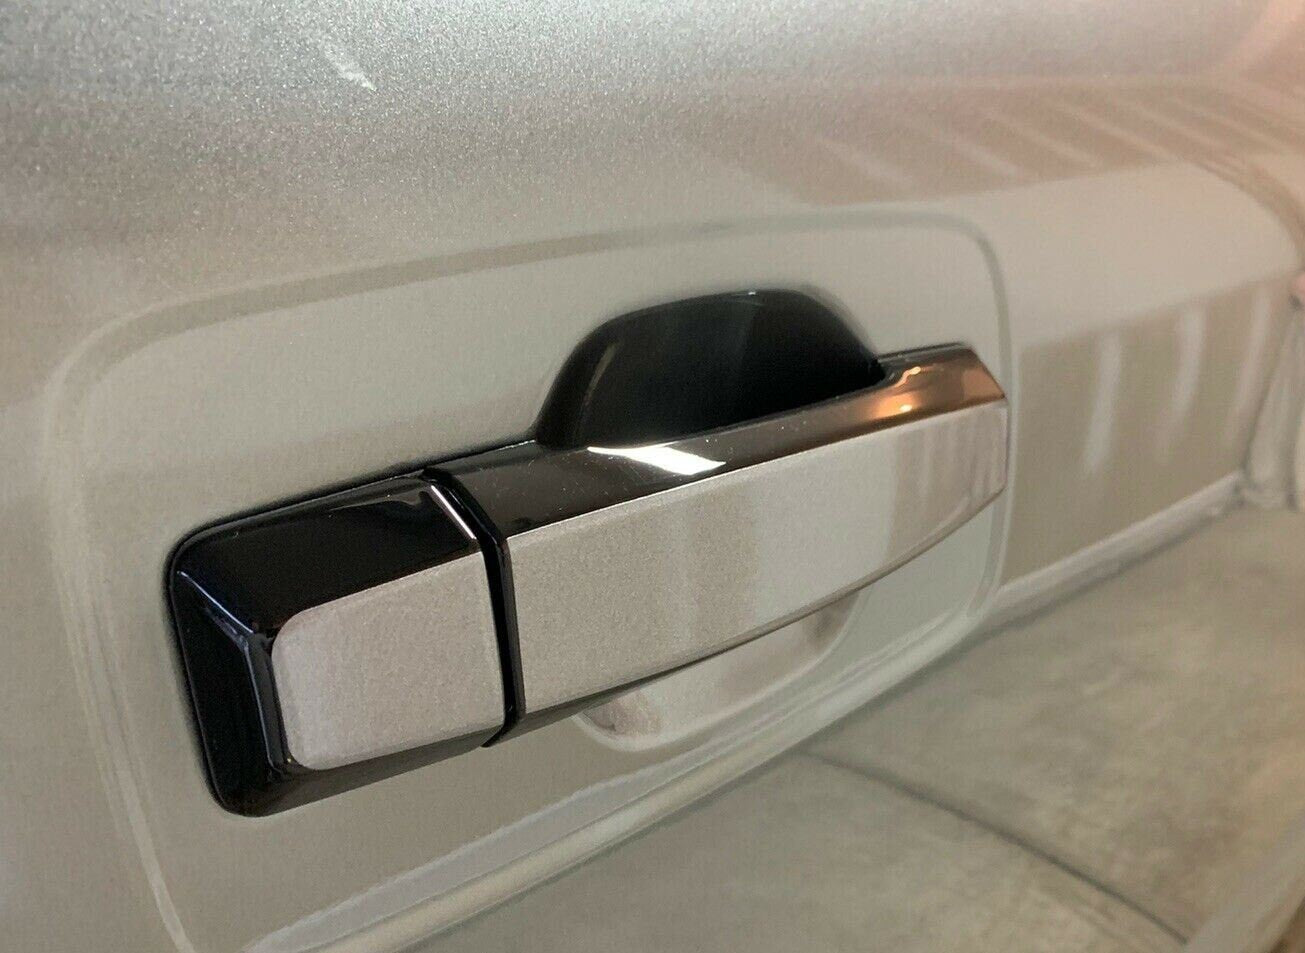 Full Set of Custom Black OR Chrome Door Handle Overlays / Covers For the 2005-2015 Nissan Armada -- You Choose the Color Insert